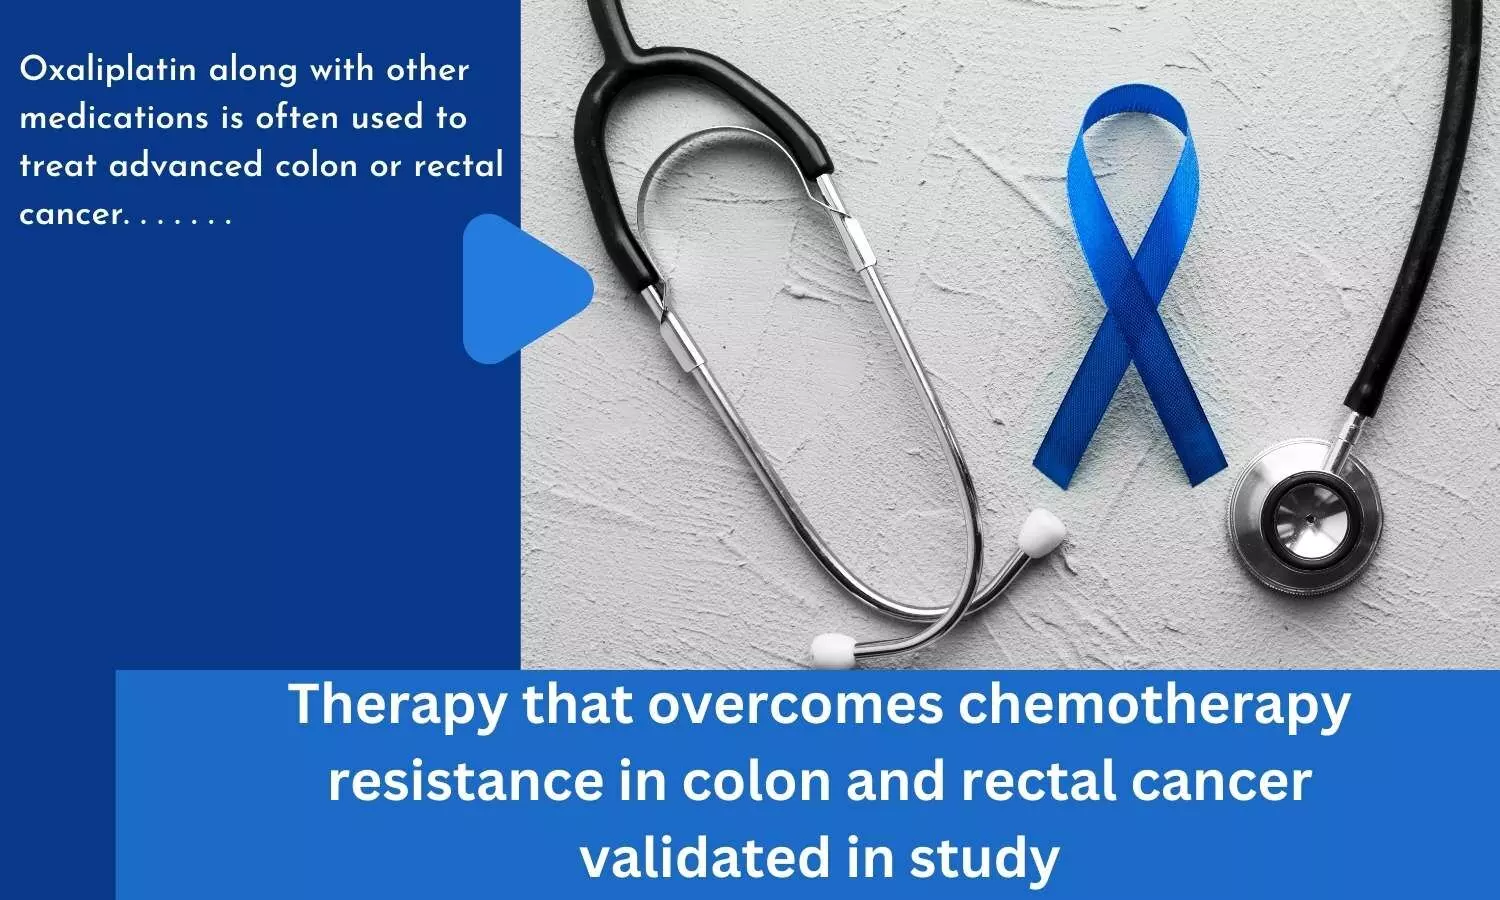 Therapy that overcomes chemotherapy resistance in colon and rectal cancer validated in study